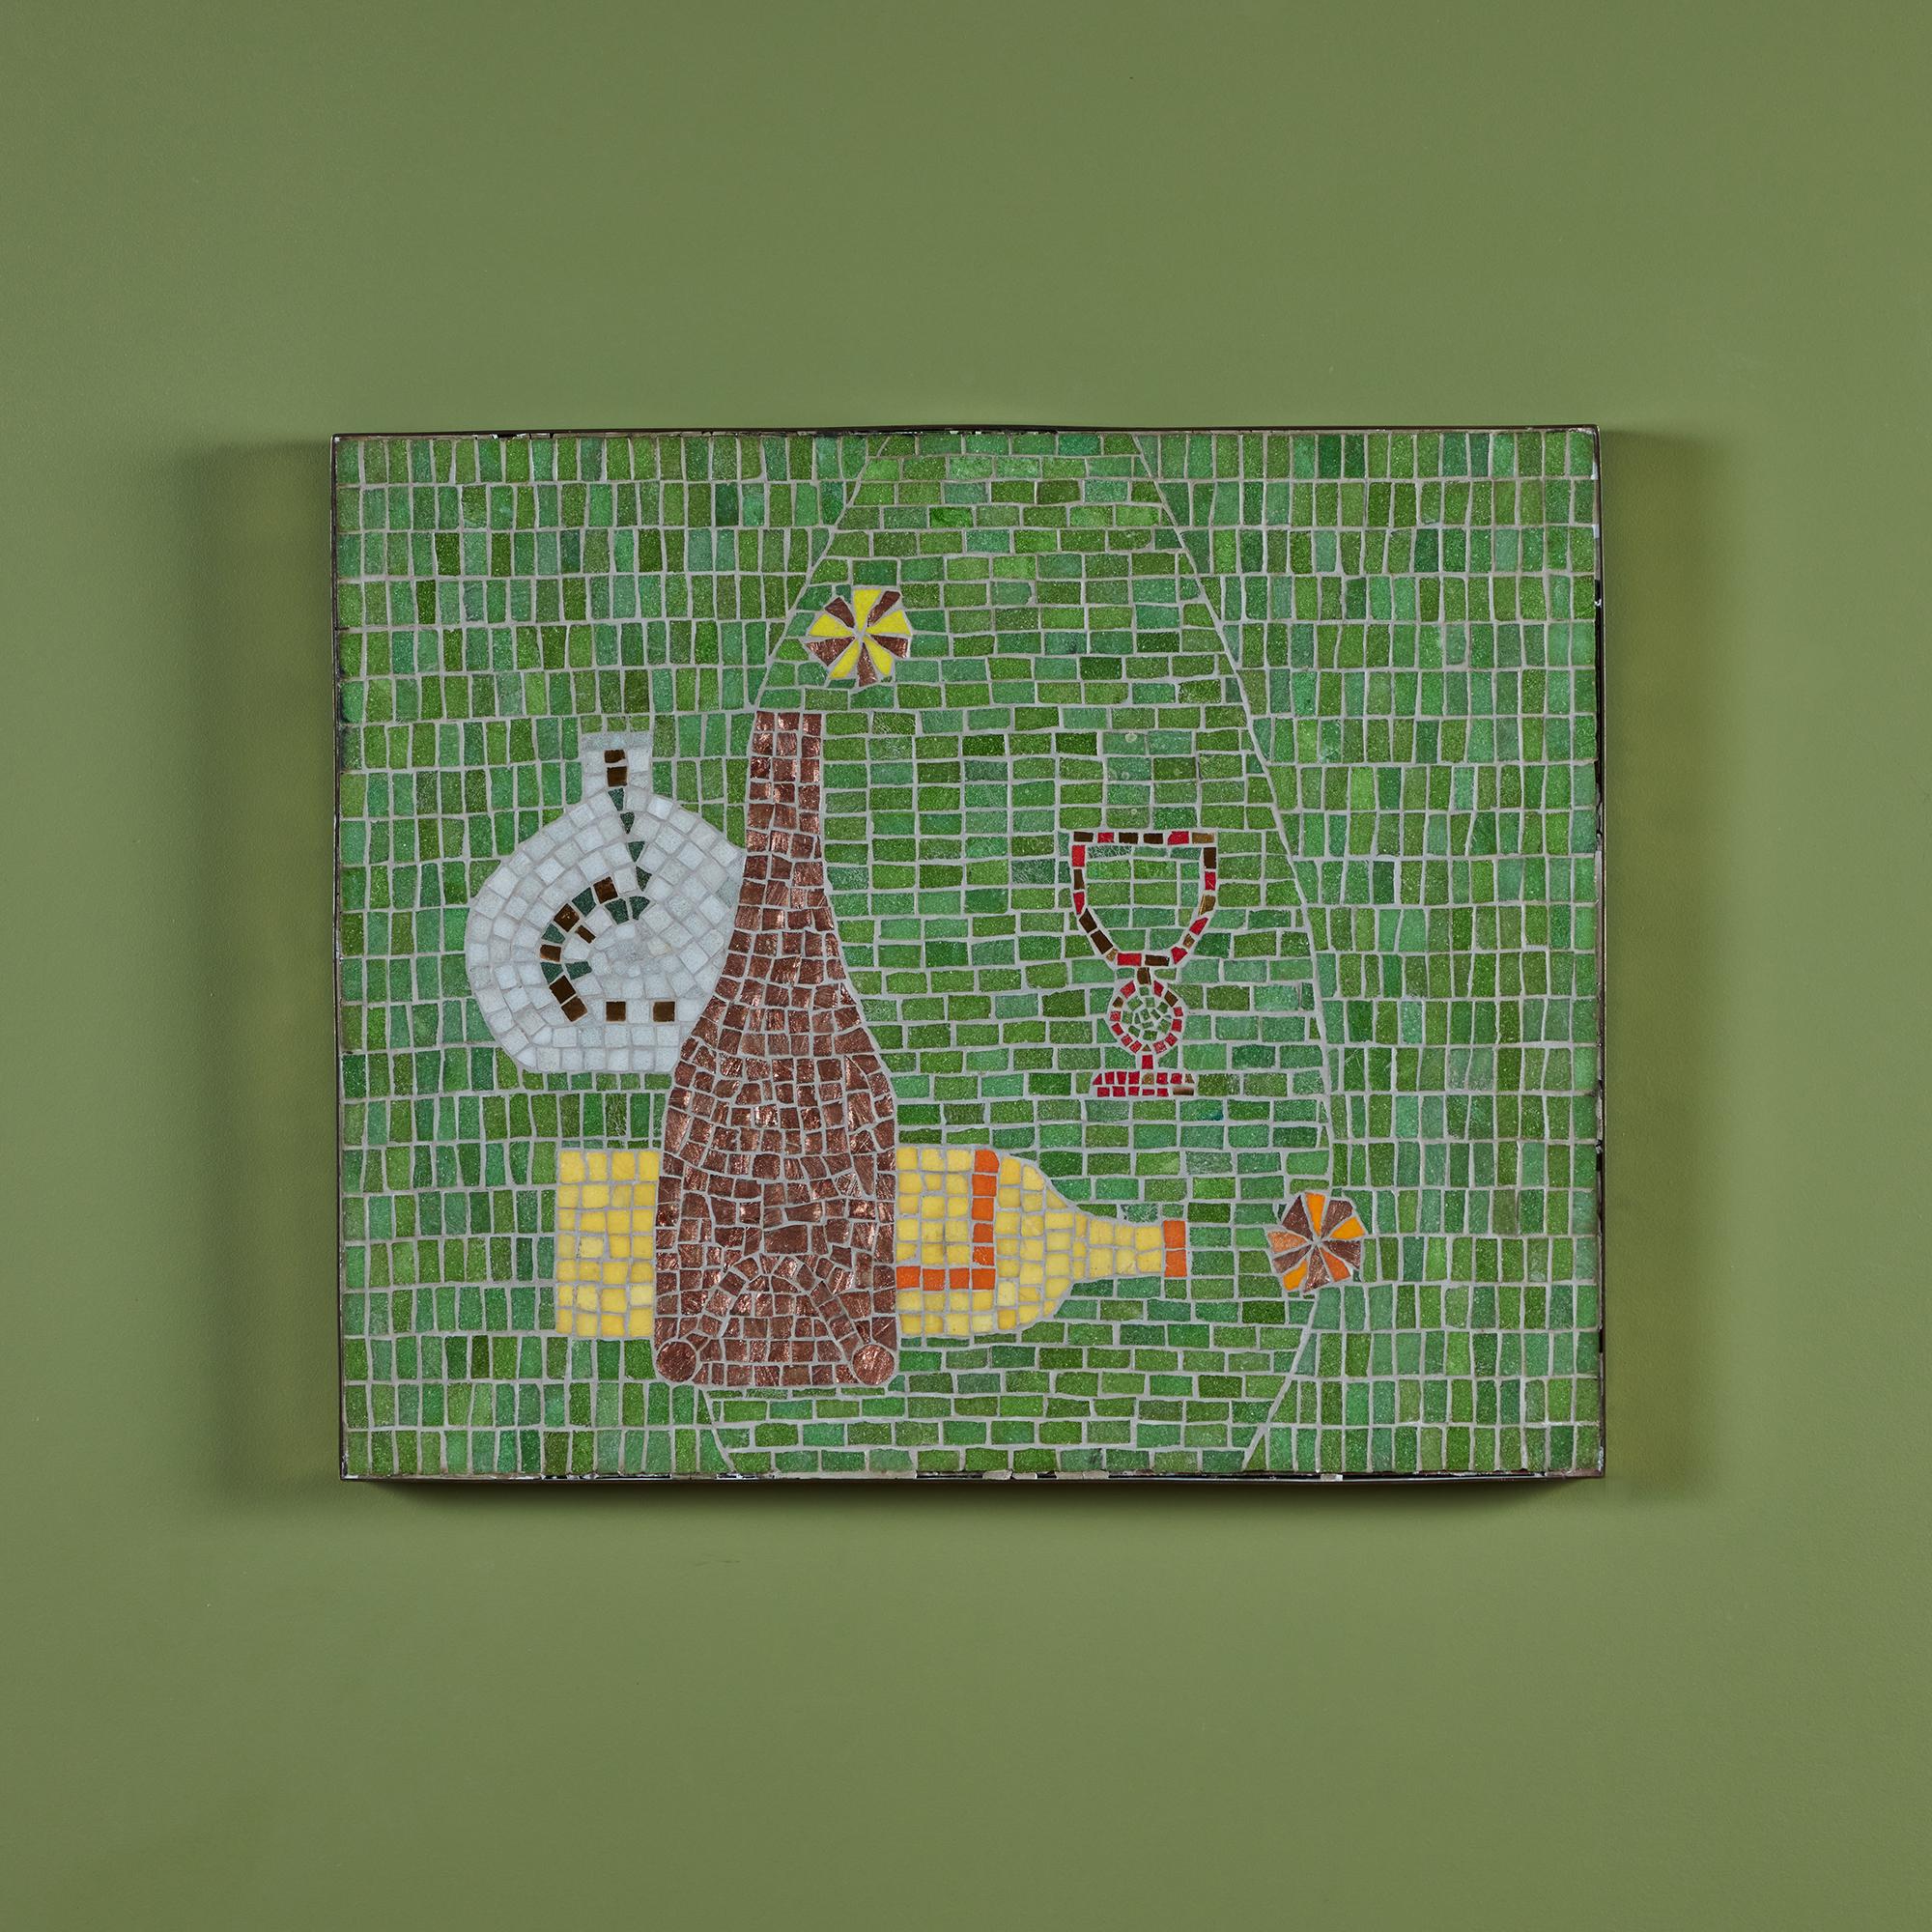 Mosaic tile art piece in the style of Evelyn Ackerman. This piece is composed of varying square, rectangular and round shaped ceramic glazed tiles which make up a playful bottle scene. The colors range from bright hues of green and yellow to more